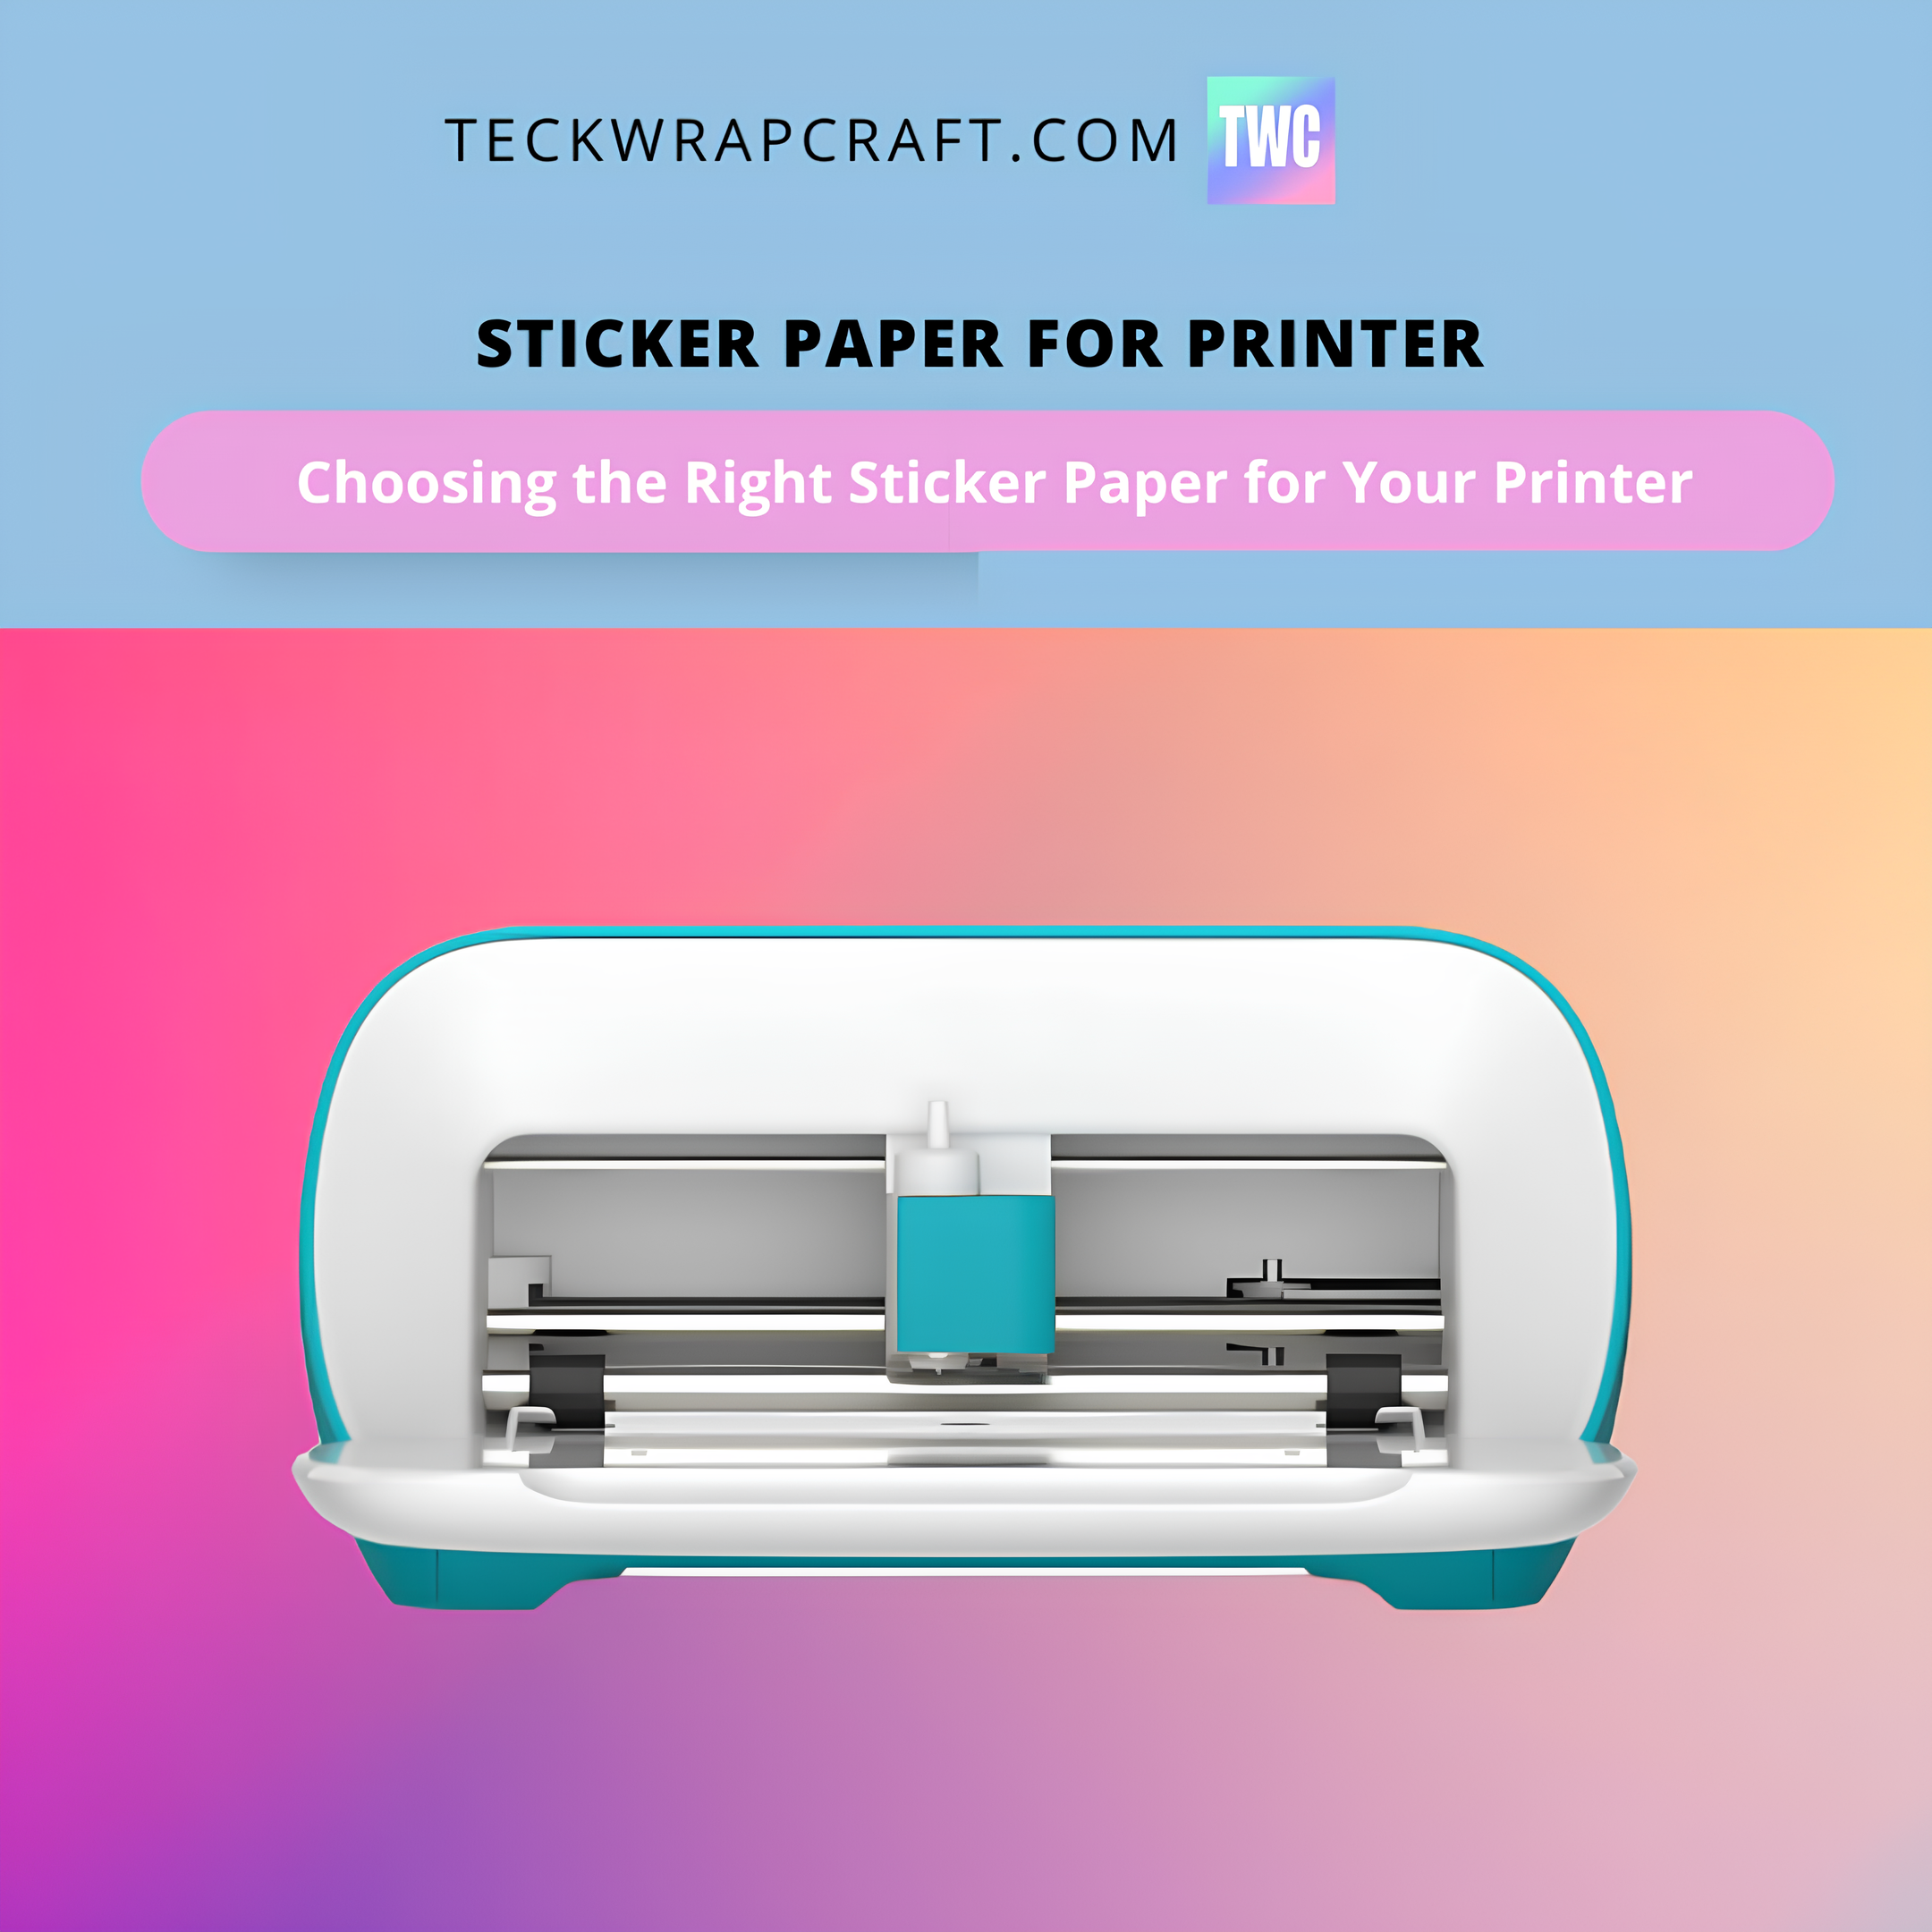 Sticker Paper For Printer: Which One To Use?